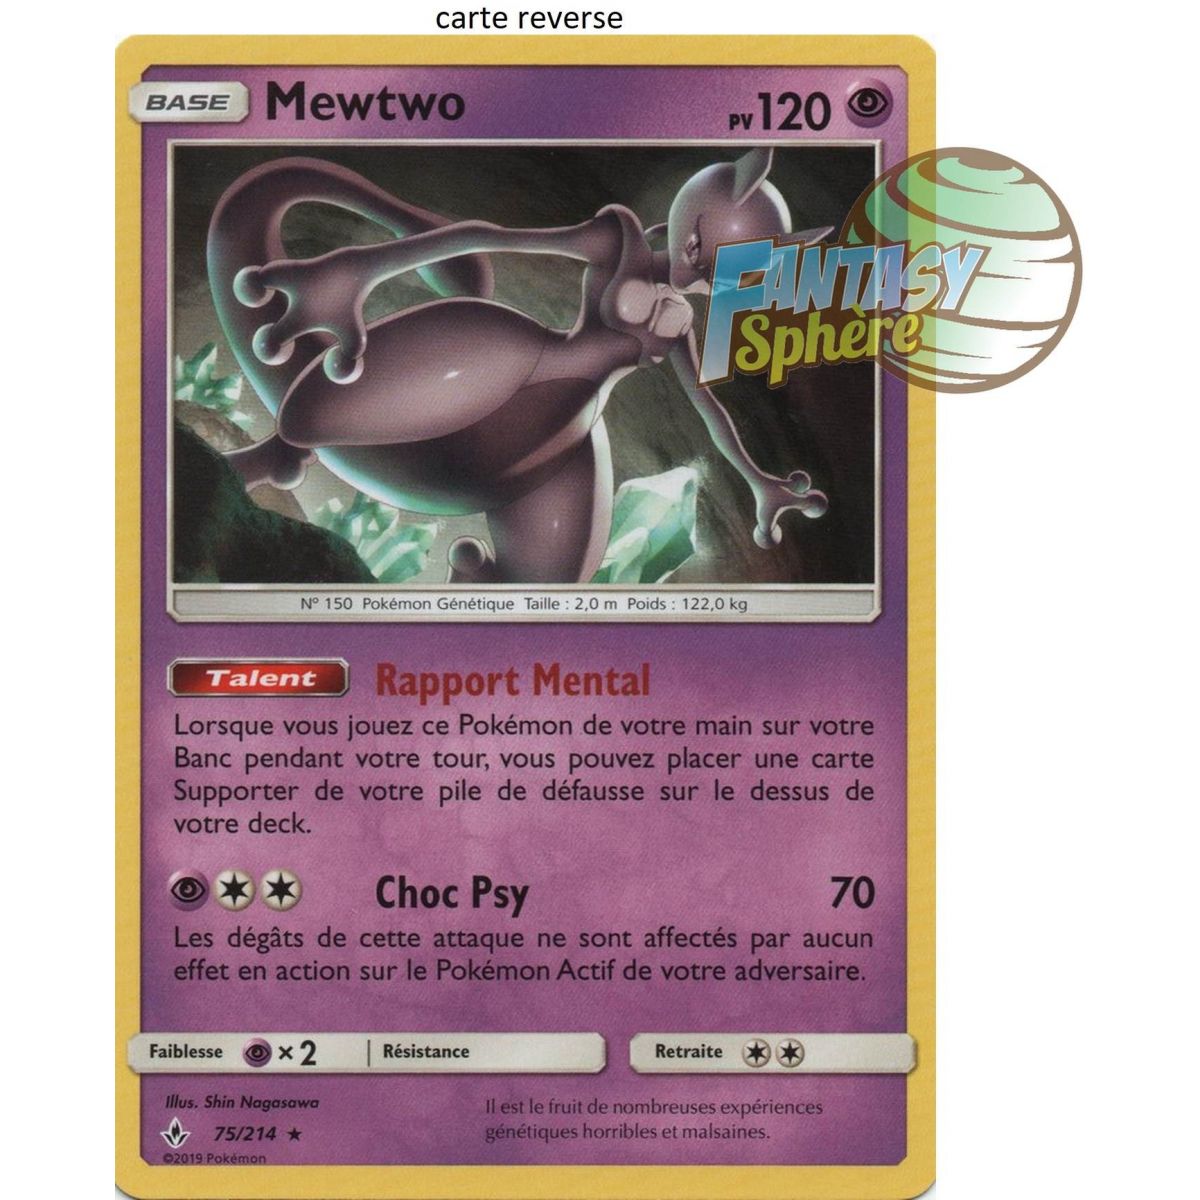 Mewtwo - Reverse 75/214 - Sun and Moon 10 Infallible Alliance